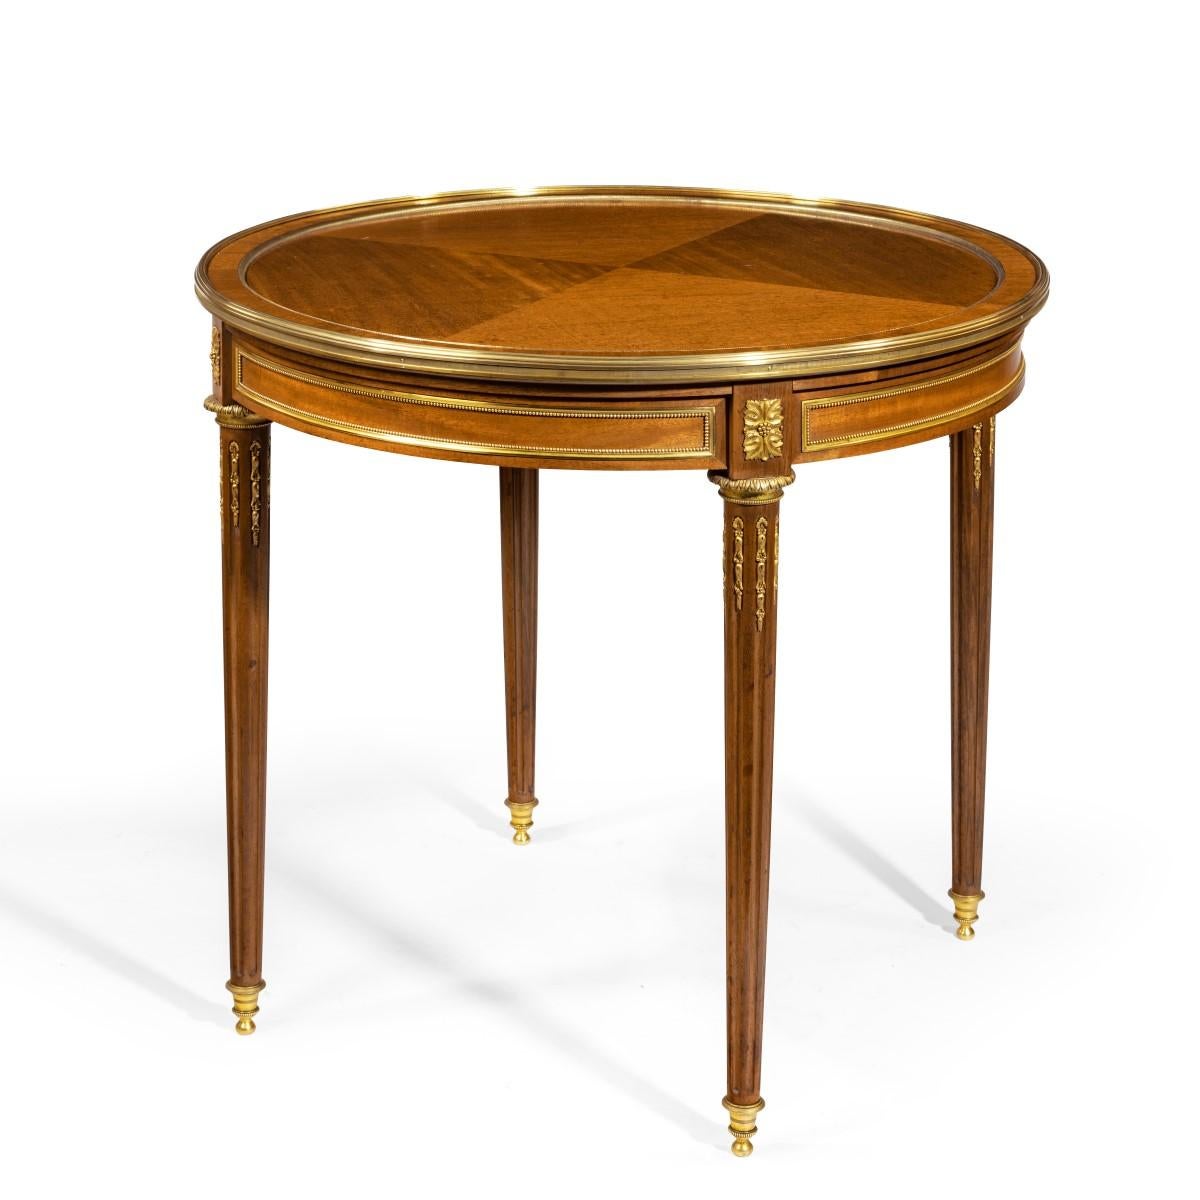 A Napoleon III mahogany side table, the circular top with two disguised frieze drawers alternating with two slides, set upon stop-fluted tapering legs on turned brass castors, decorated with quarter veneers and ormolu mounts, French, circa